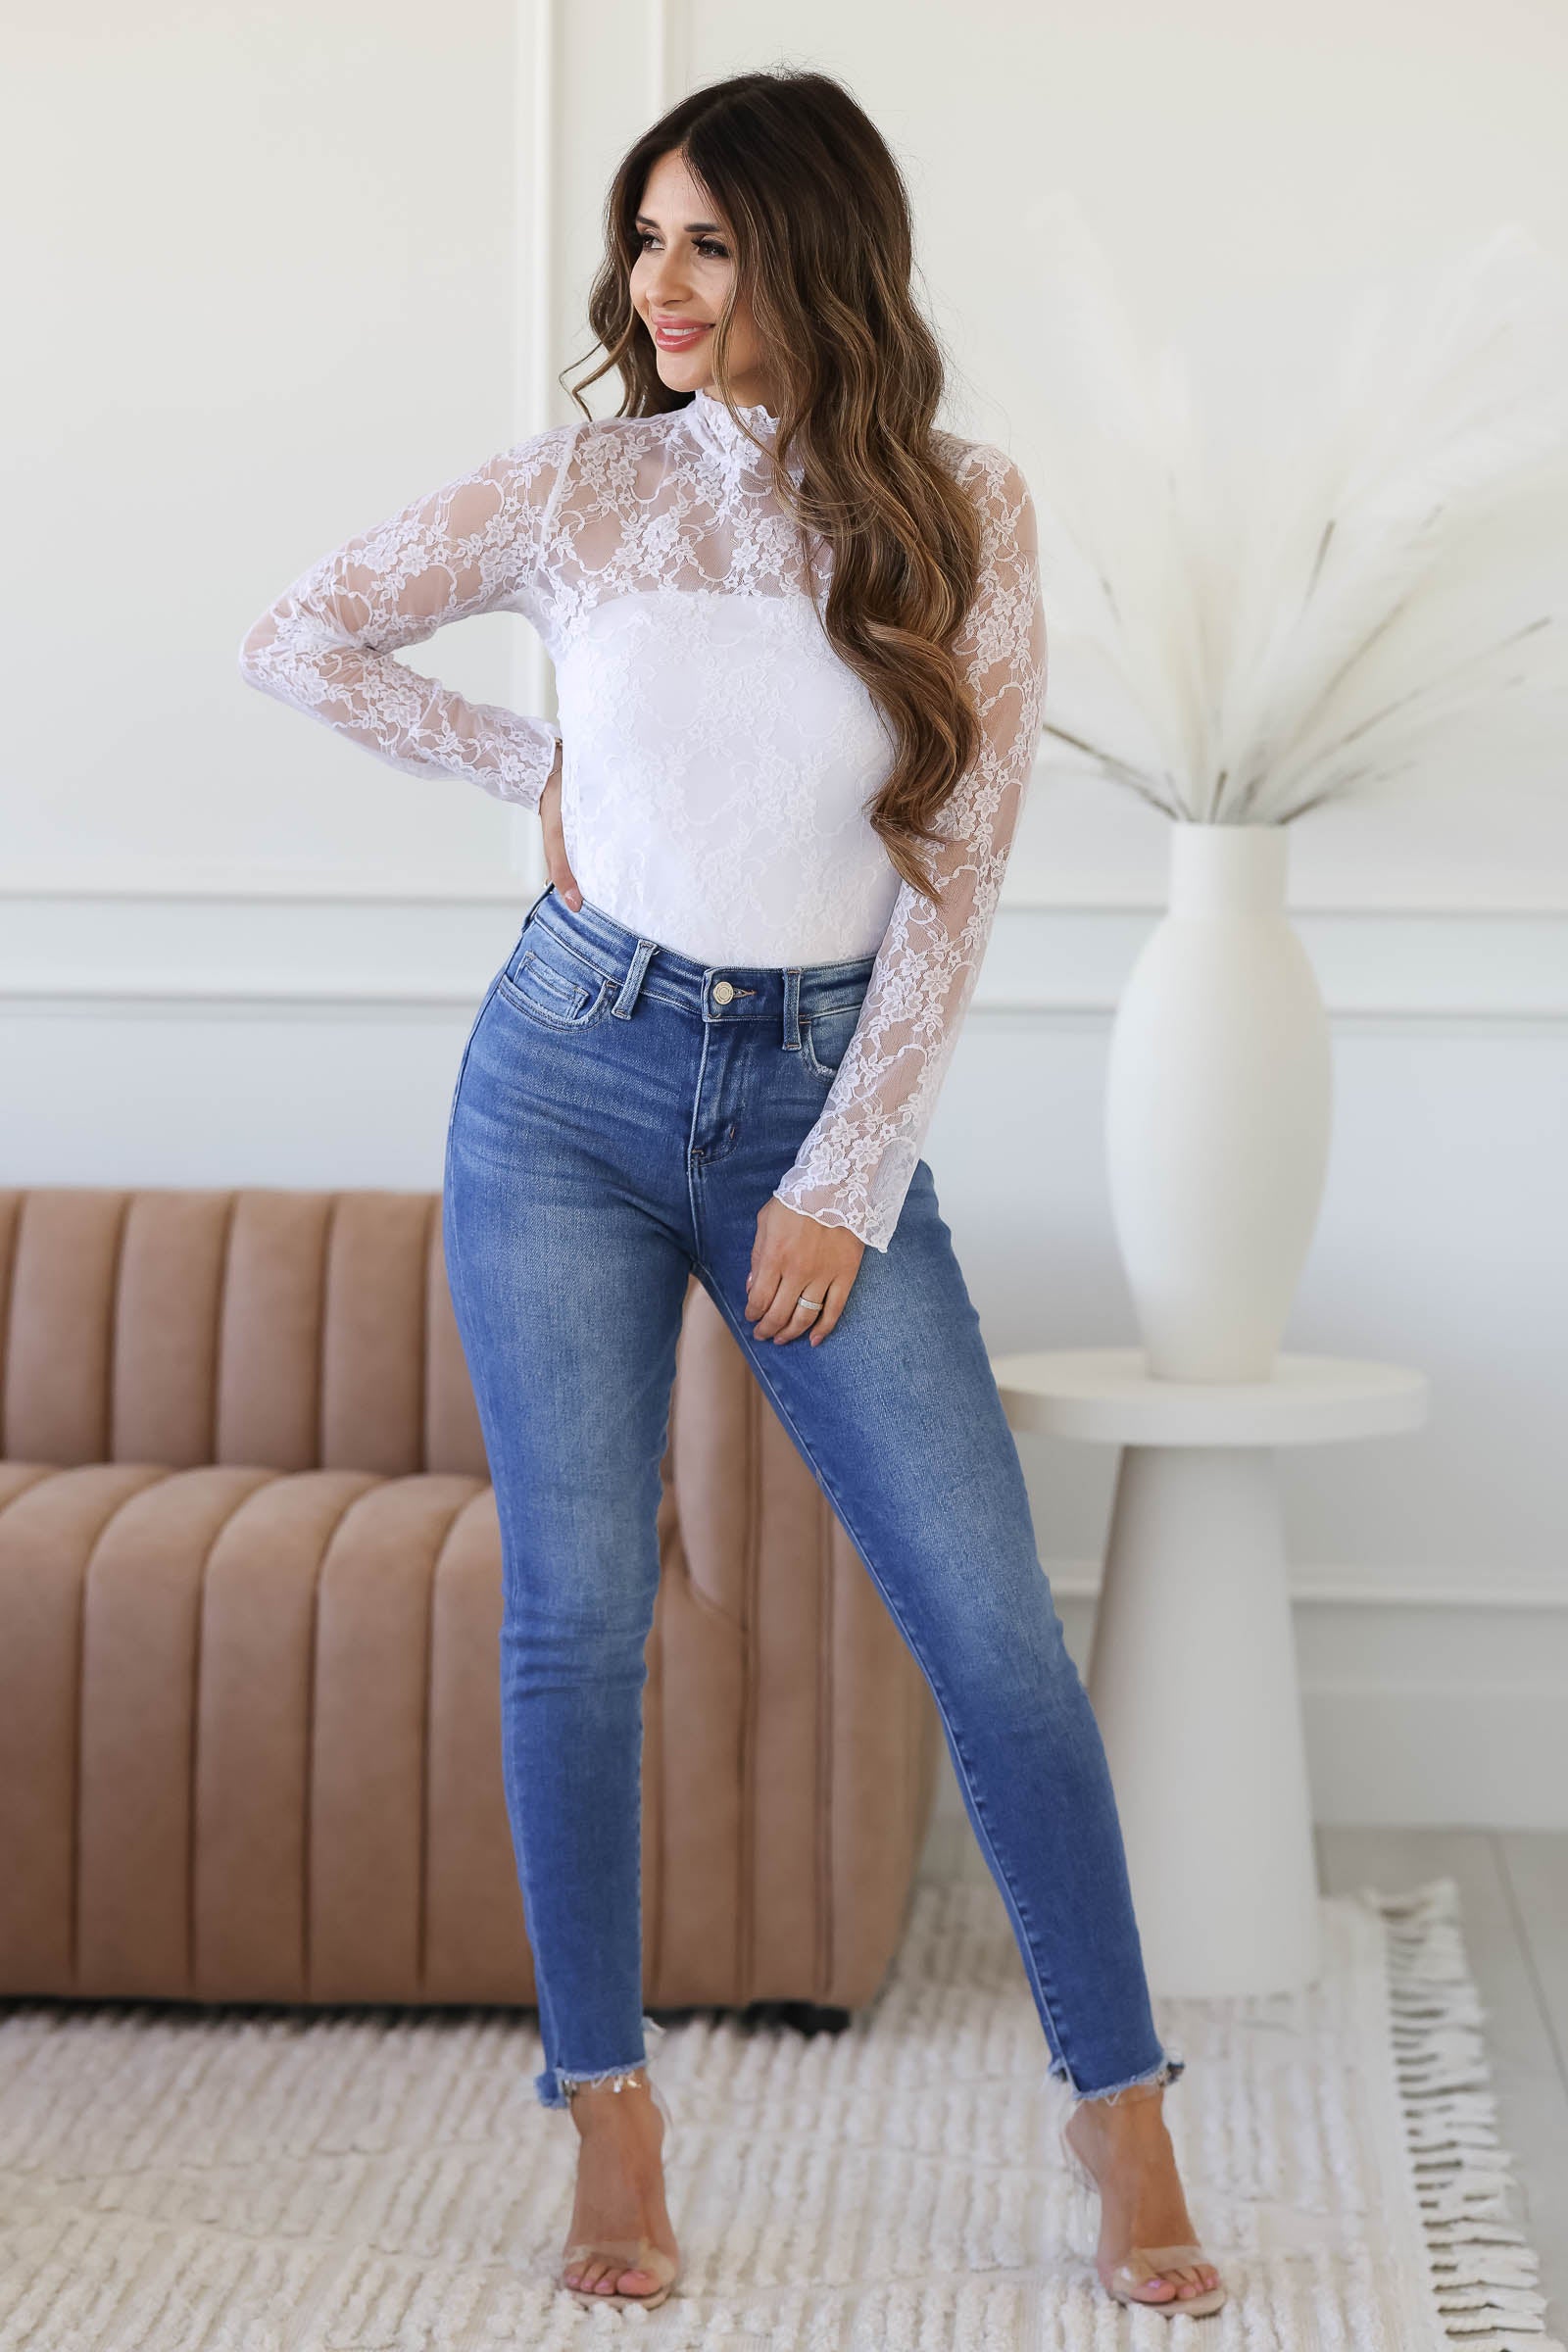 Lilith Lace Long Sleeve Sheer Top, Closet Candy 1